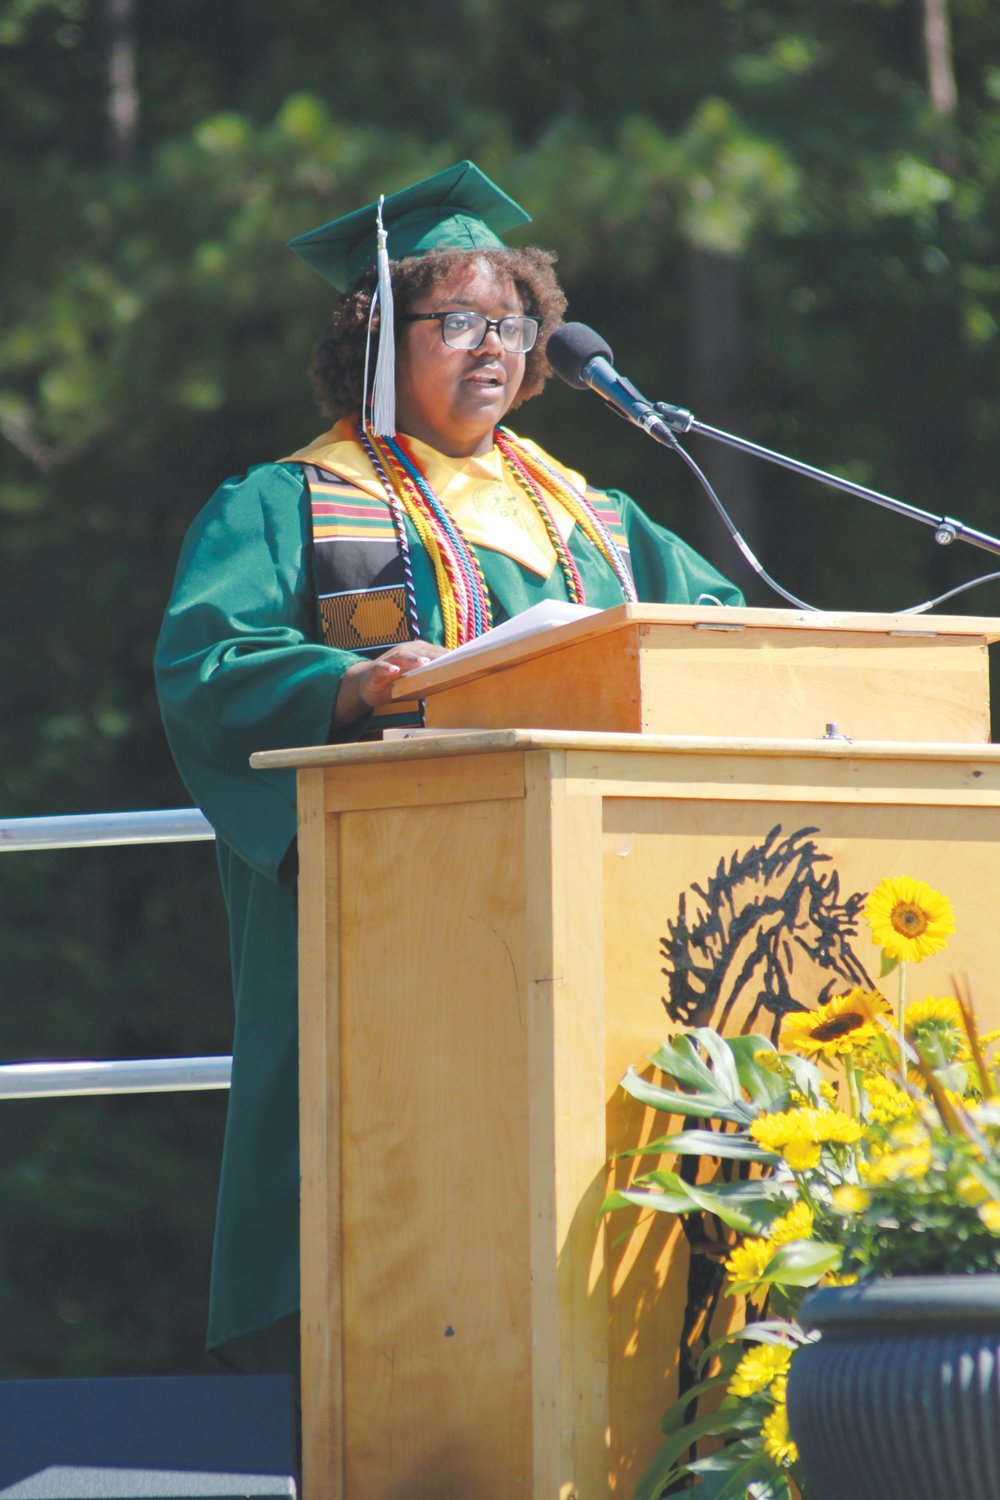 Nothwood senior Kennedy Poston reads her final reflection speech to her fellow classmates during graduation on Friday at Northwood High School in Pittsboro.